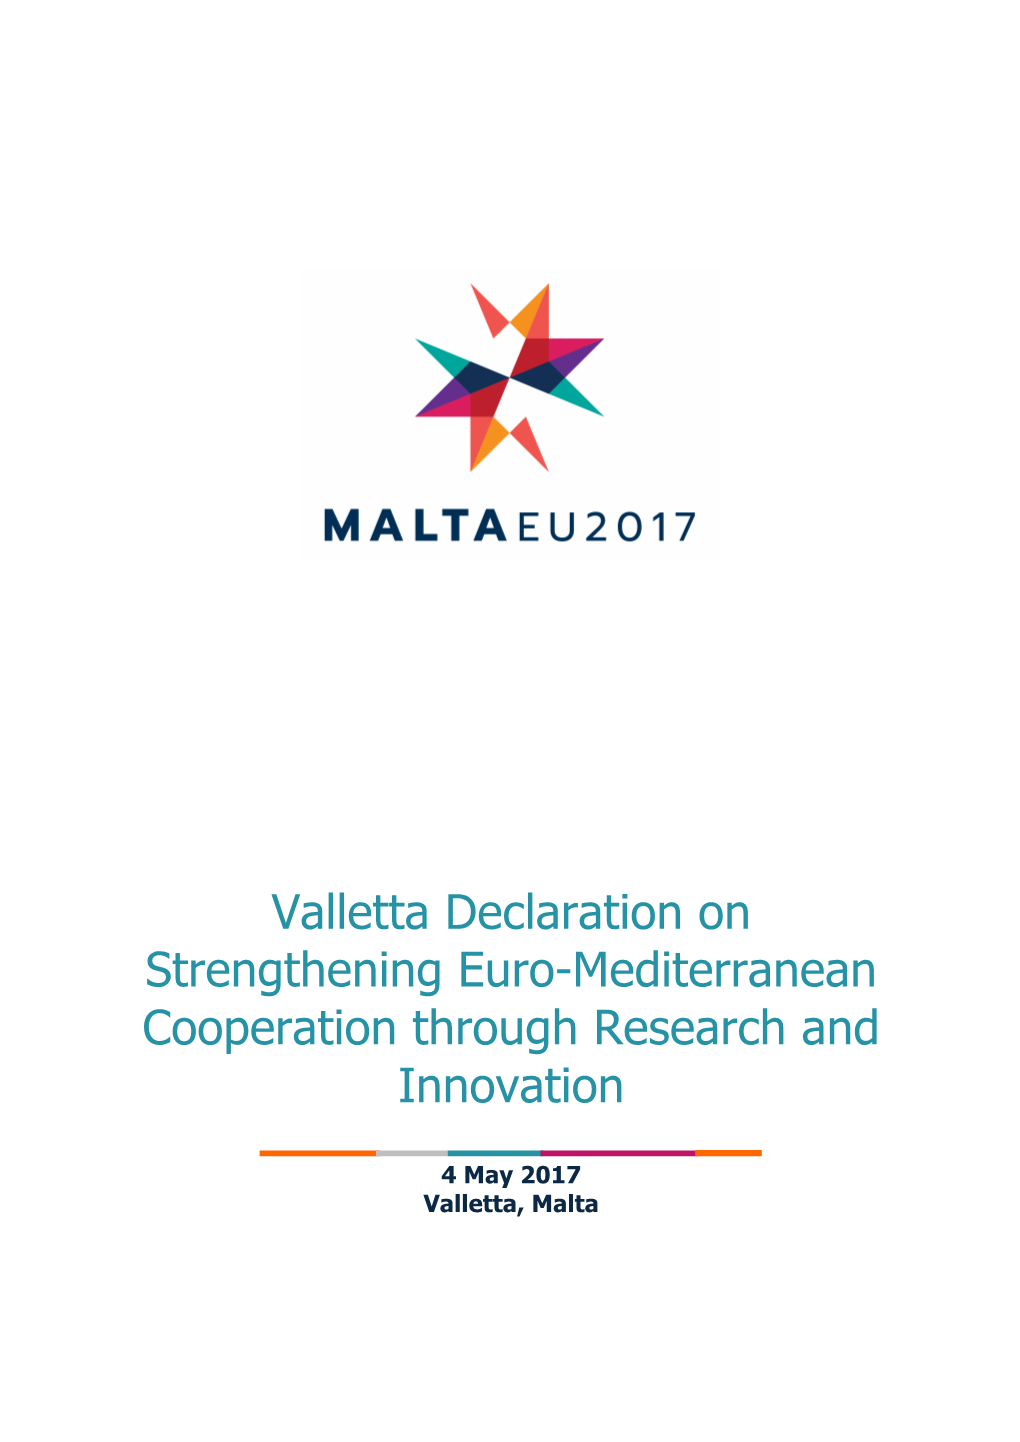 Declaration on Strengthening Euro-Mediterranean Cooperation Through Research and Innovation